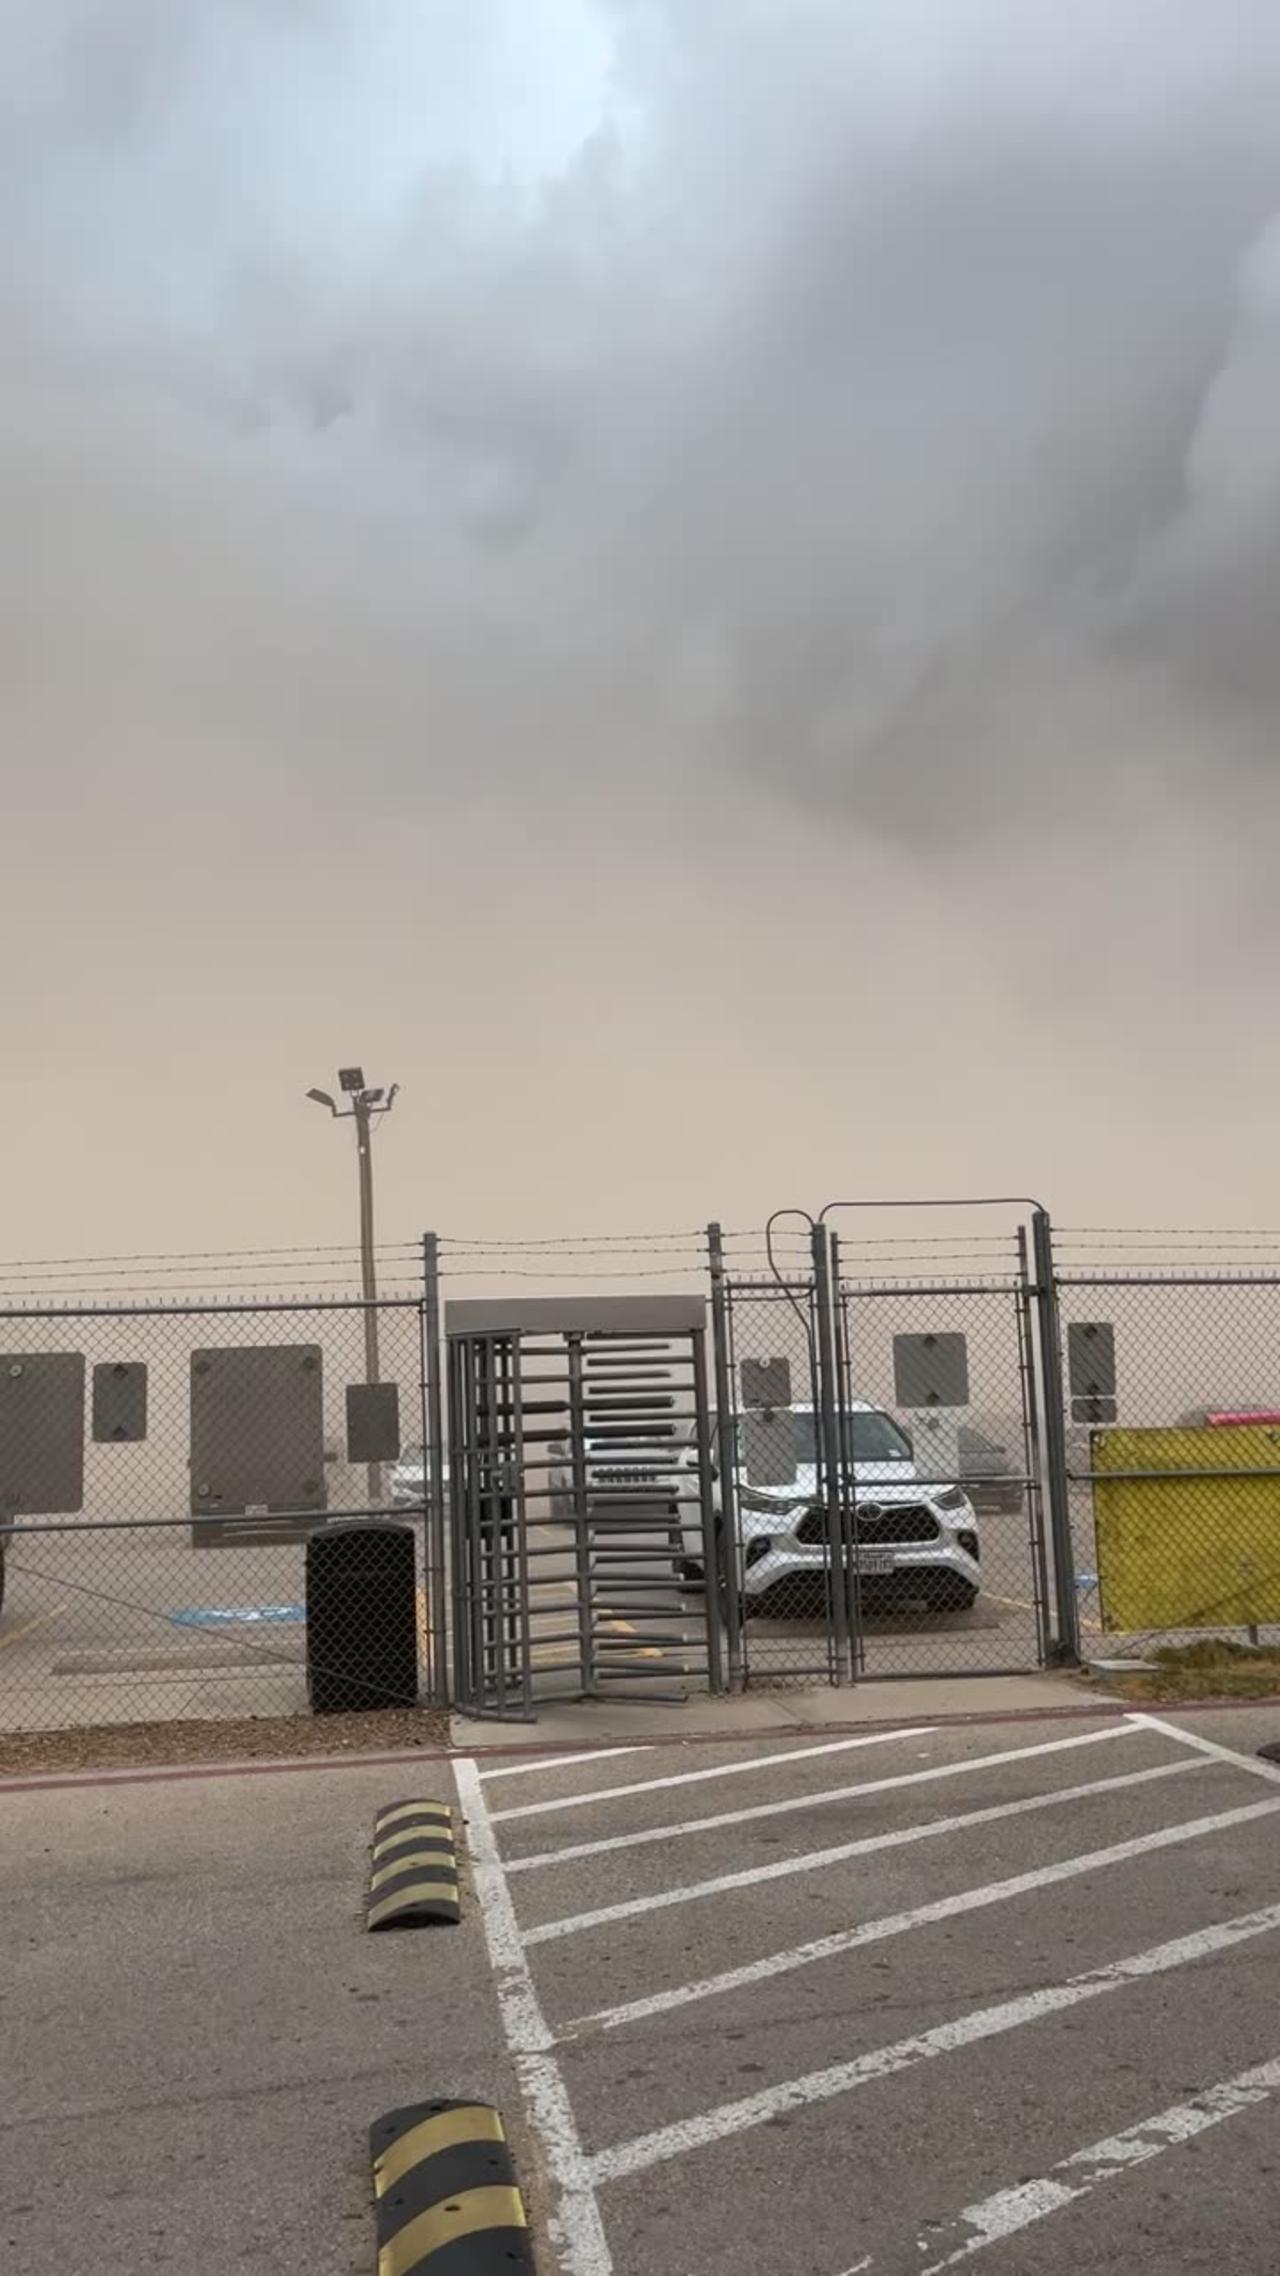 Dust Storm Occurs In Midland, Texas